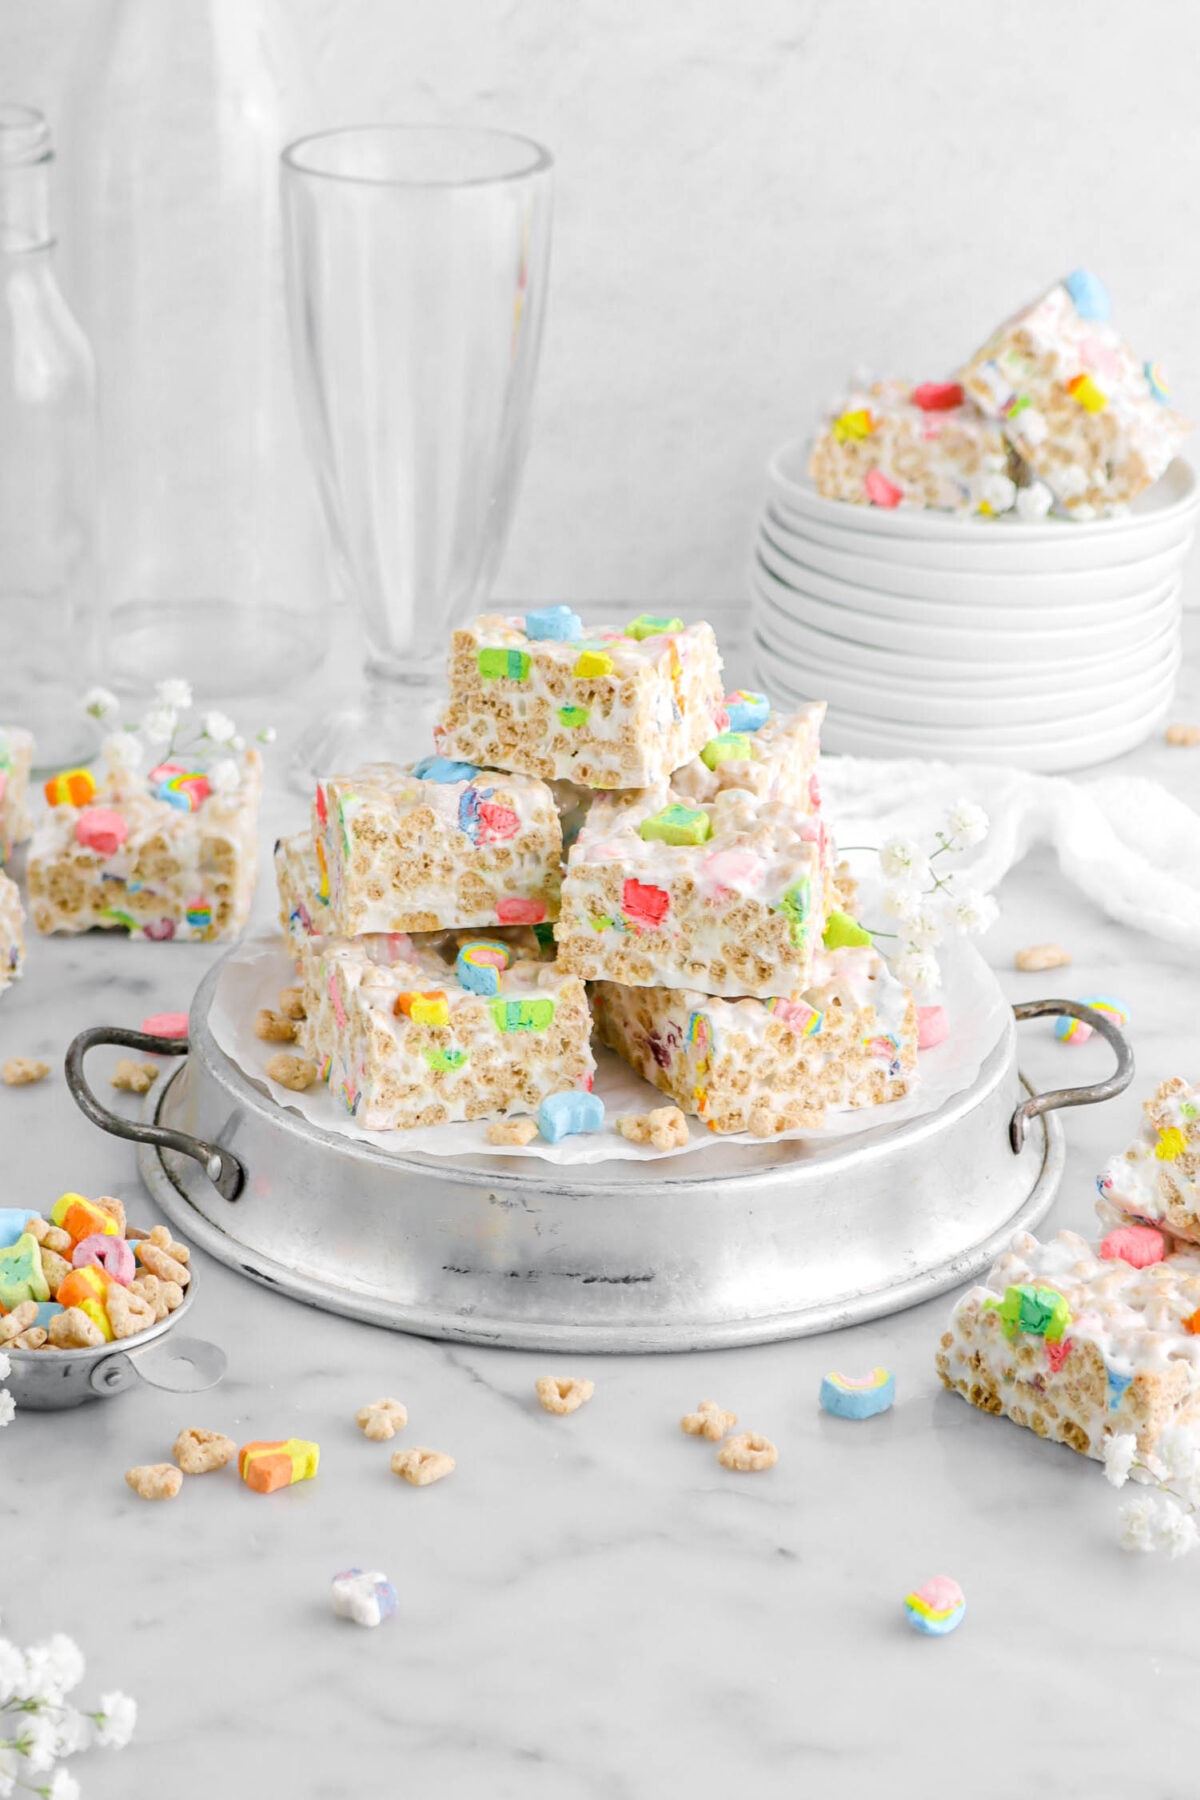 piled lucky charms marshmallow treats on upside down cake pan with stack of plates behind with more marshmallow treats and empty glasses behind with more cereal scattered around.